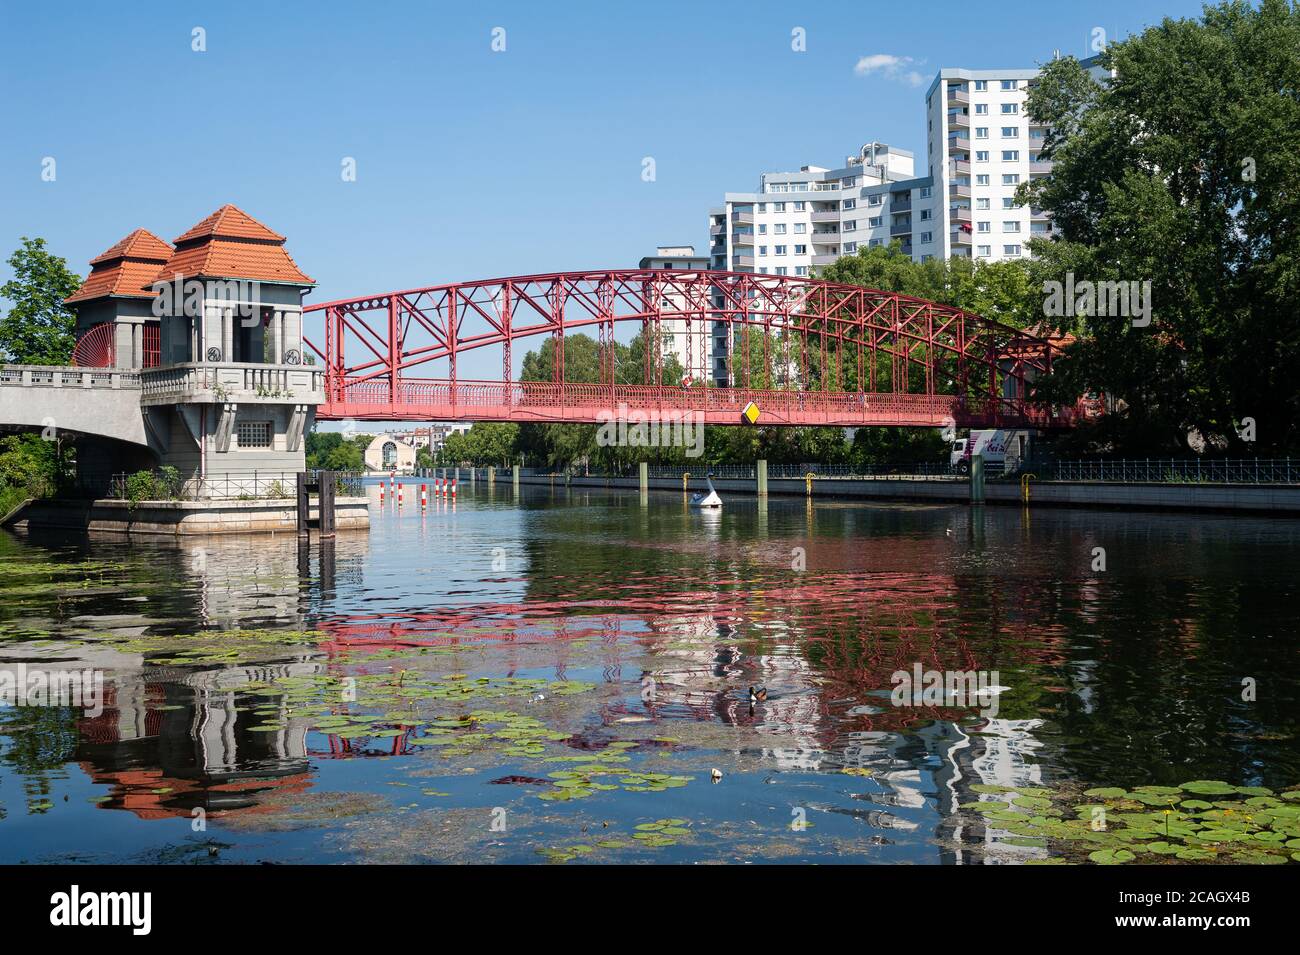 13.06.2019, Berlin, , Germany - The Tegel harbour bridge (Sechserbruecke) connects both banks of the Tegeler Fliess and Tegel harbour in the district Stock Photo